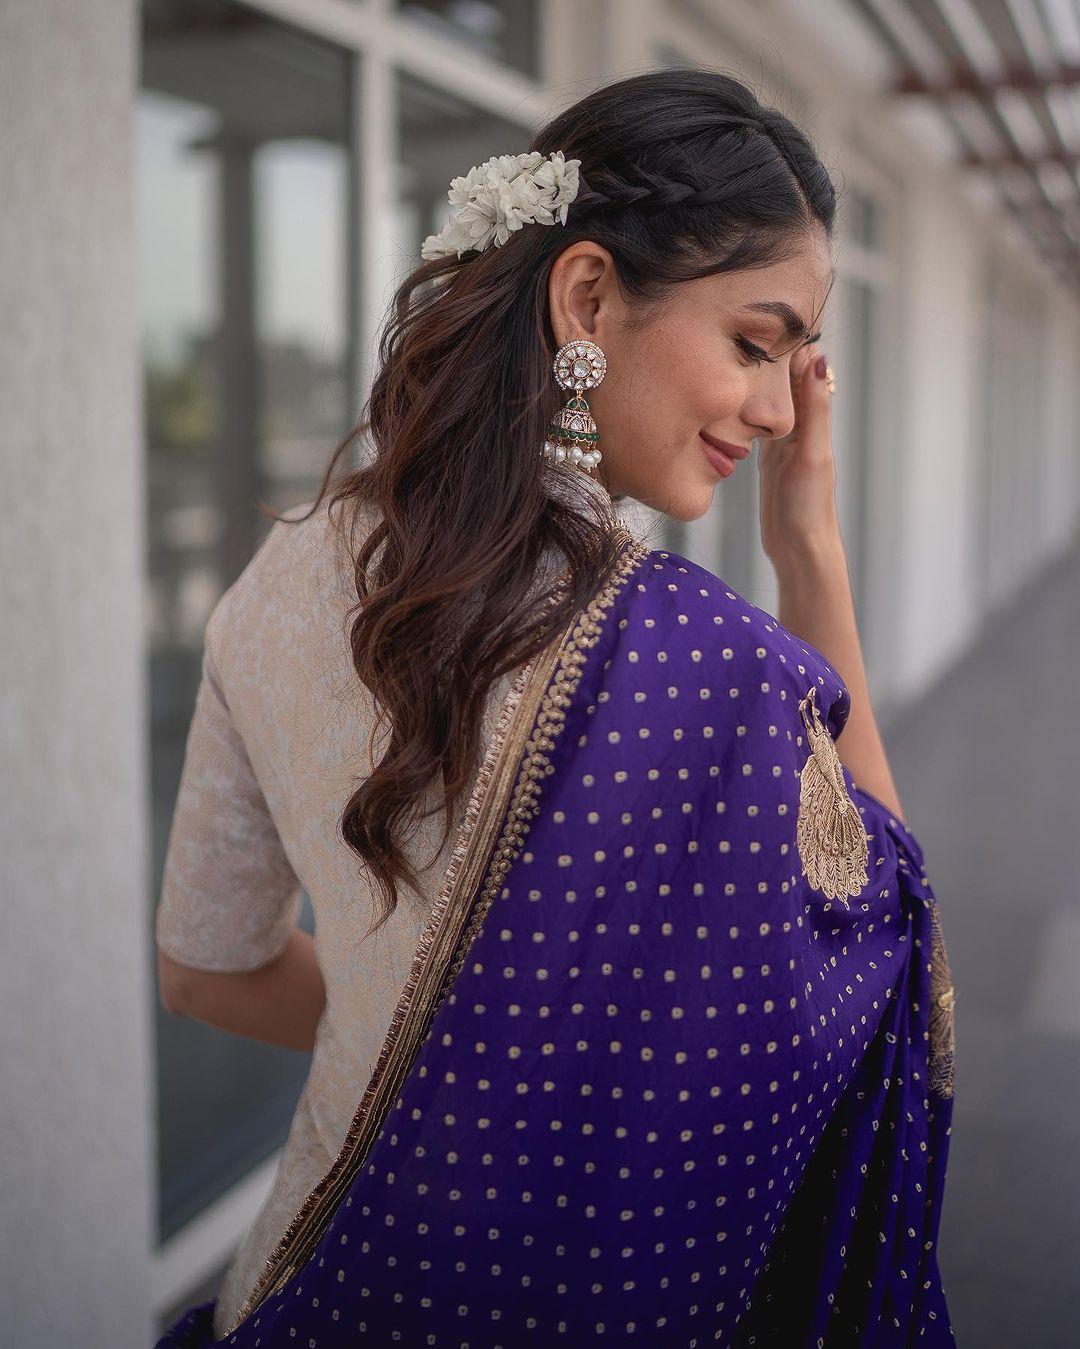 She styled her hair with loose curls and adorned it with a beautiful gajra